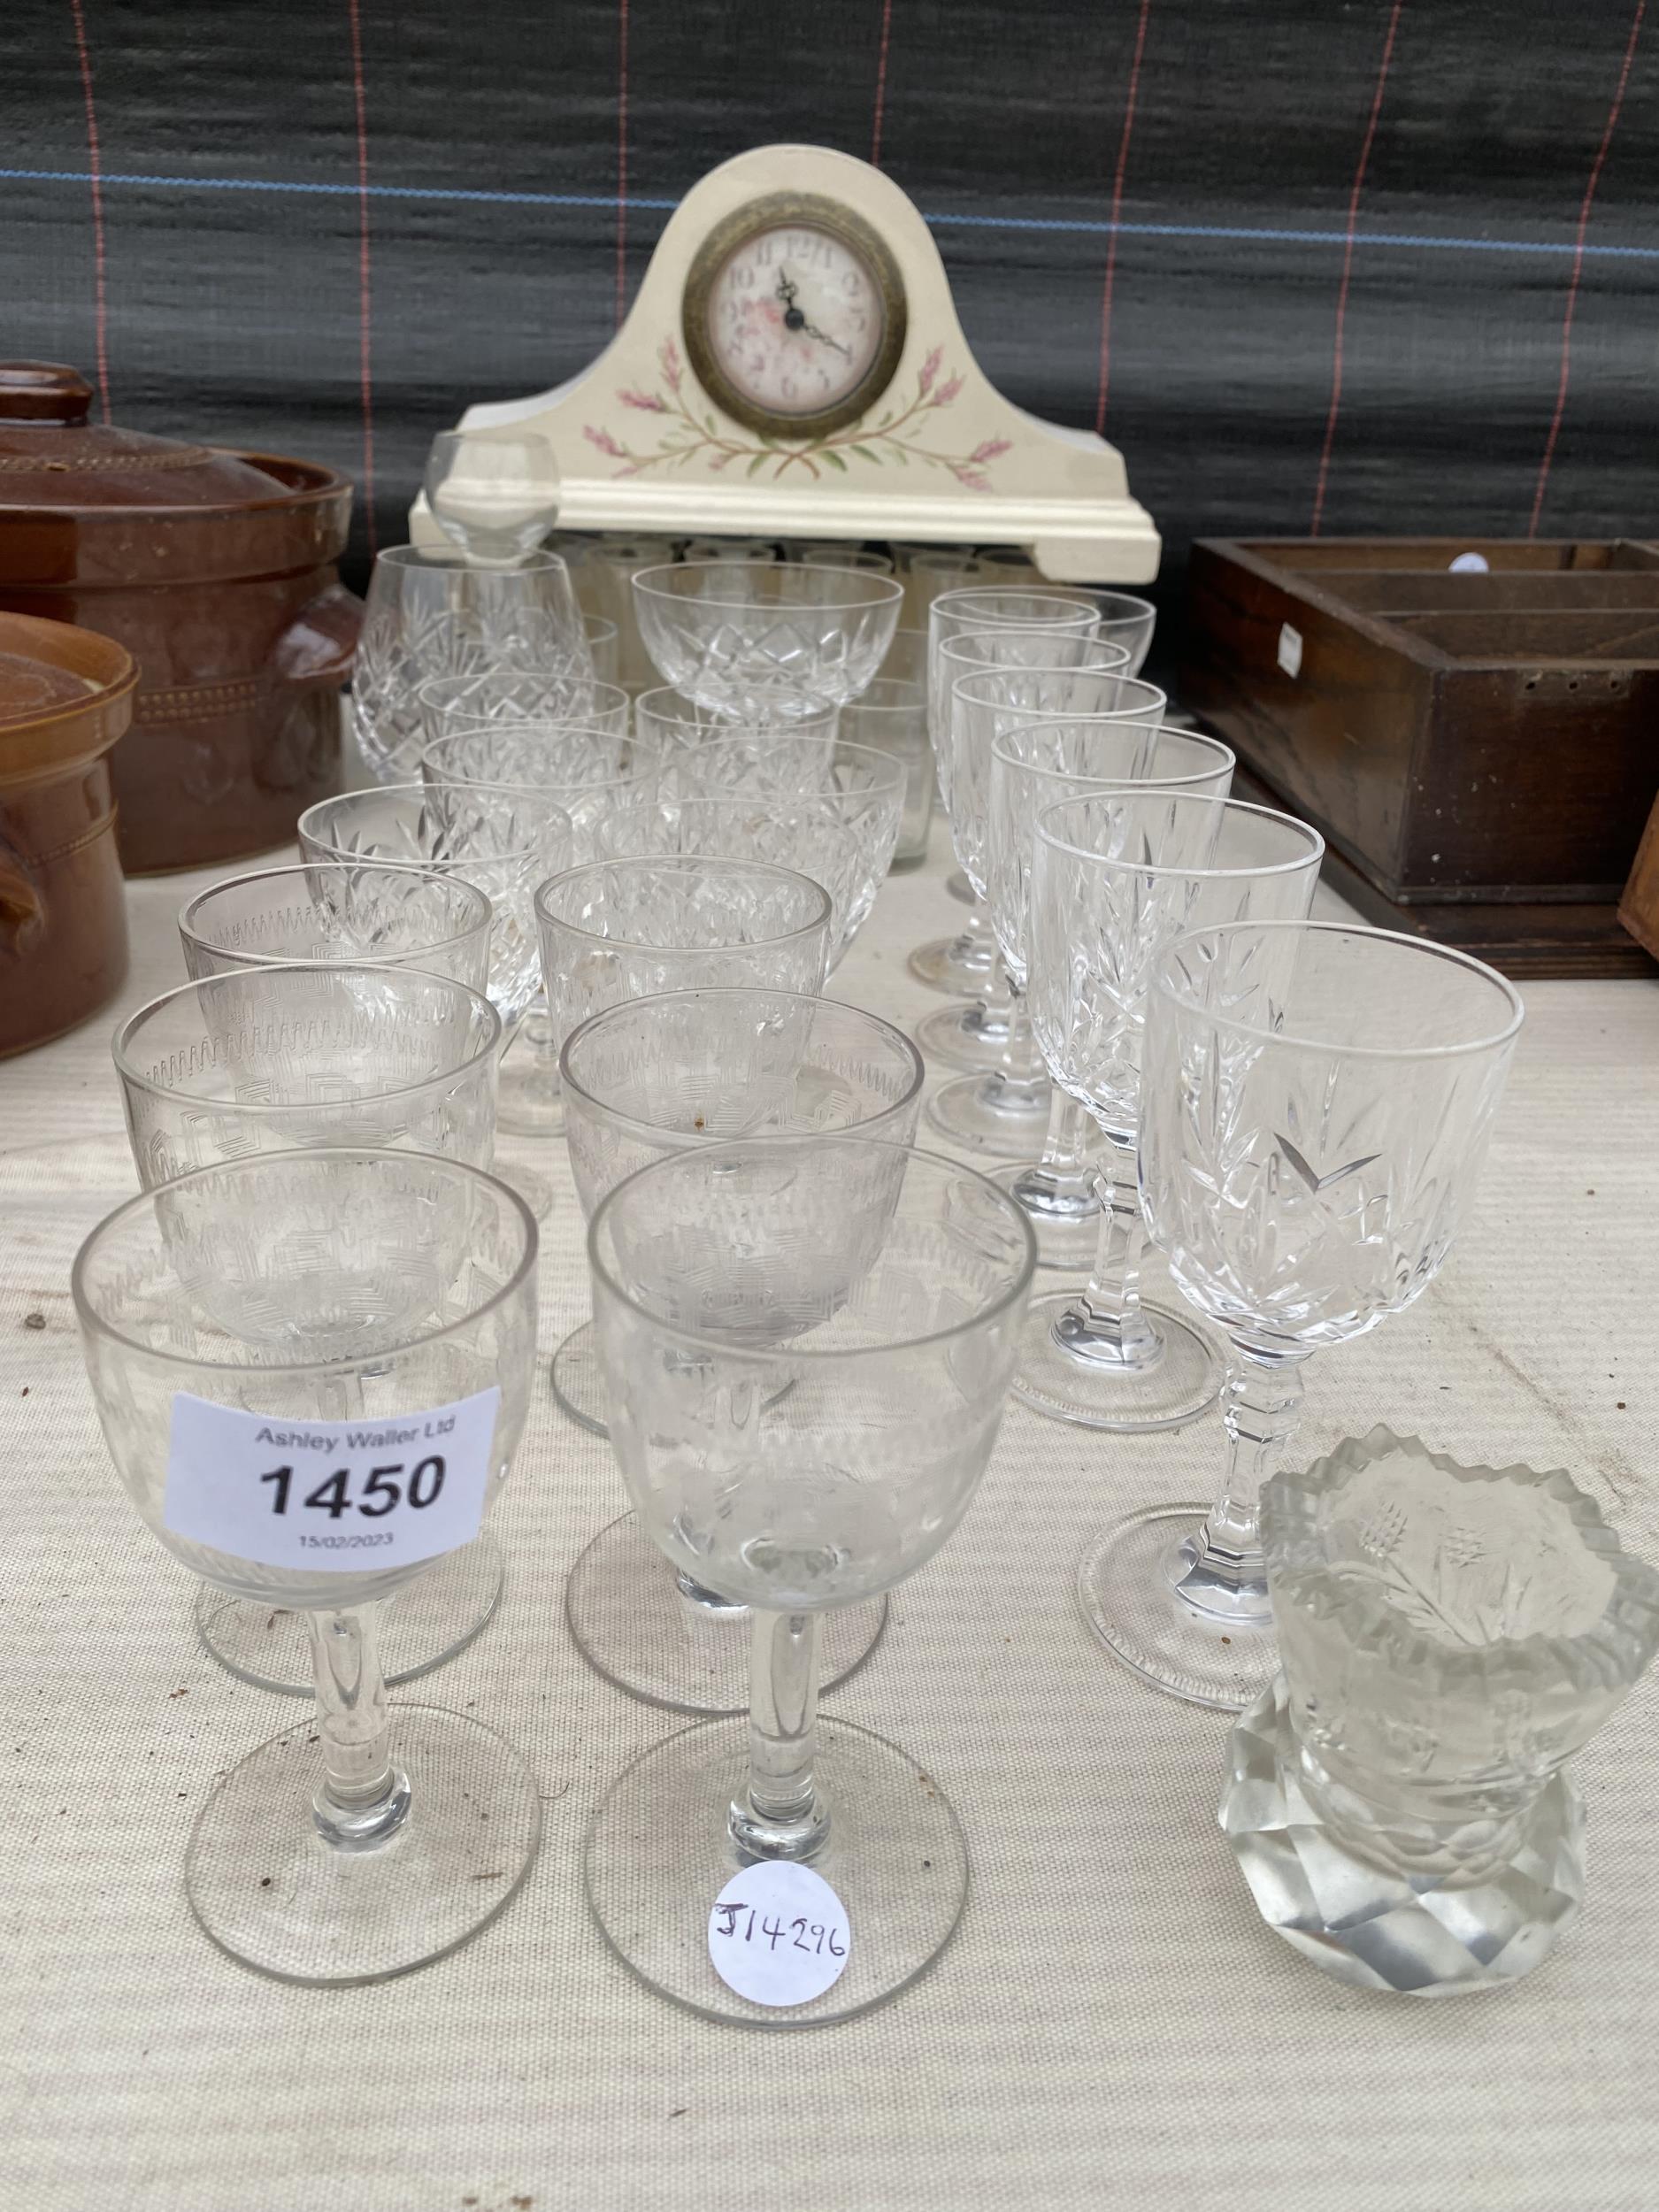 AN ASSORTMENT OF GLASS WARE AND A MANTLE CLOCK